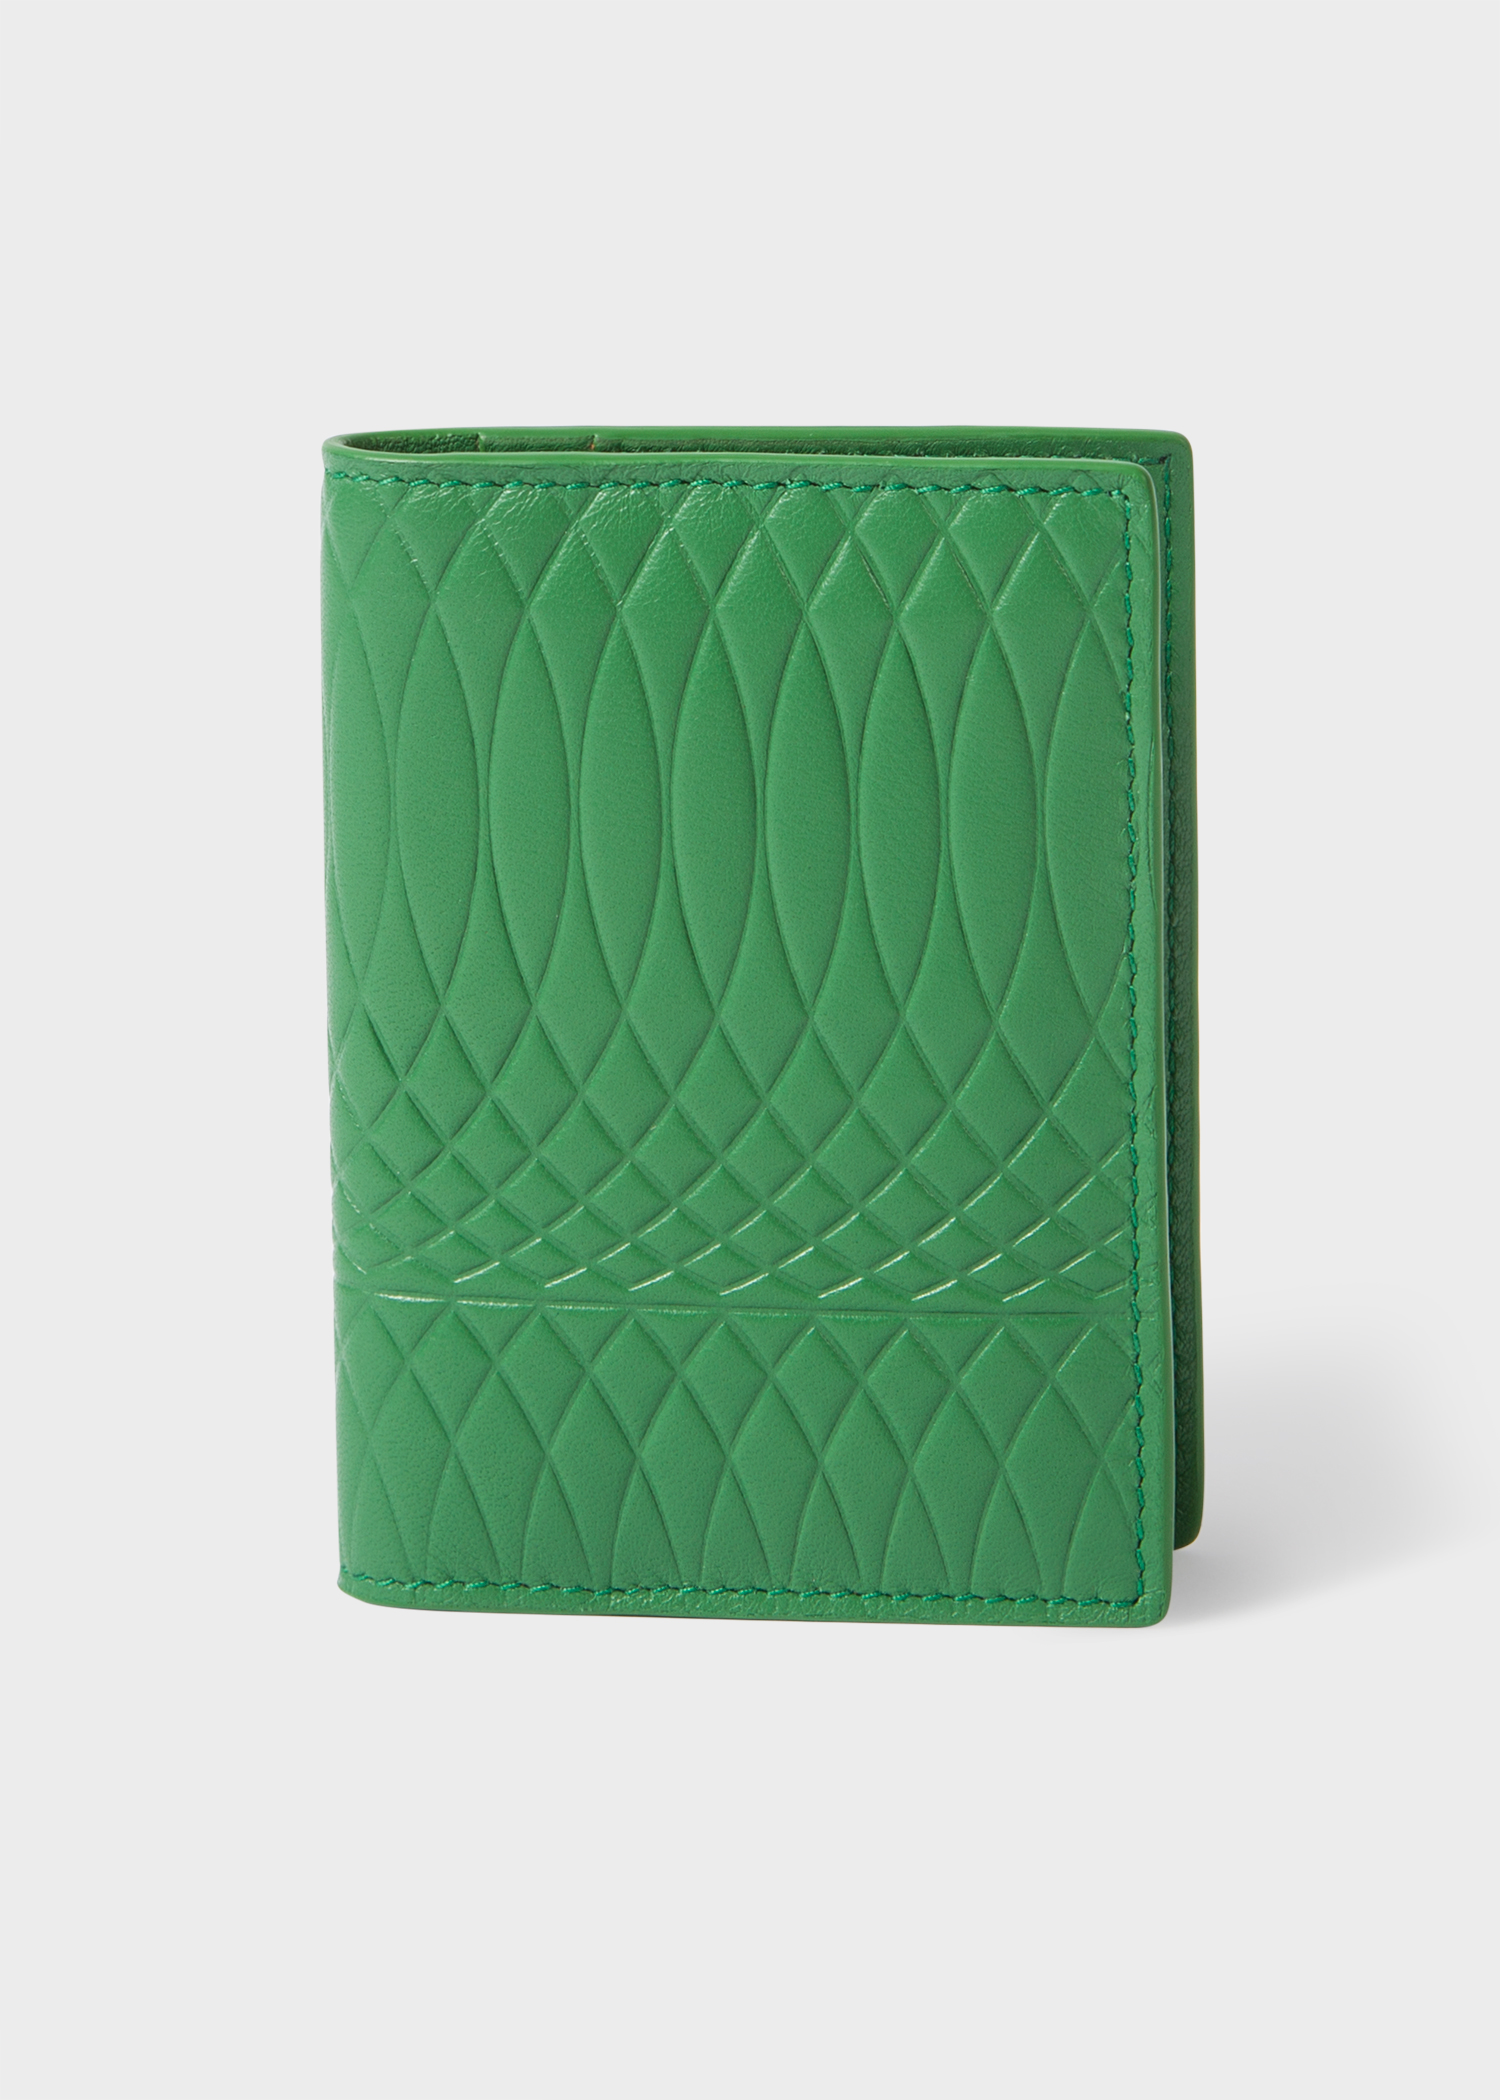 Paul Smith No.9 | Men's Green Leather Credit Card Wallet - Paul Smith